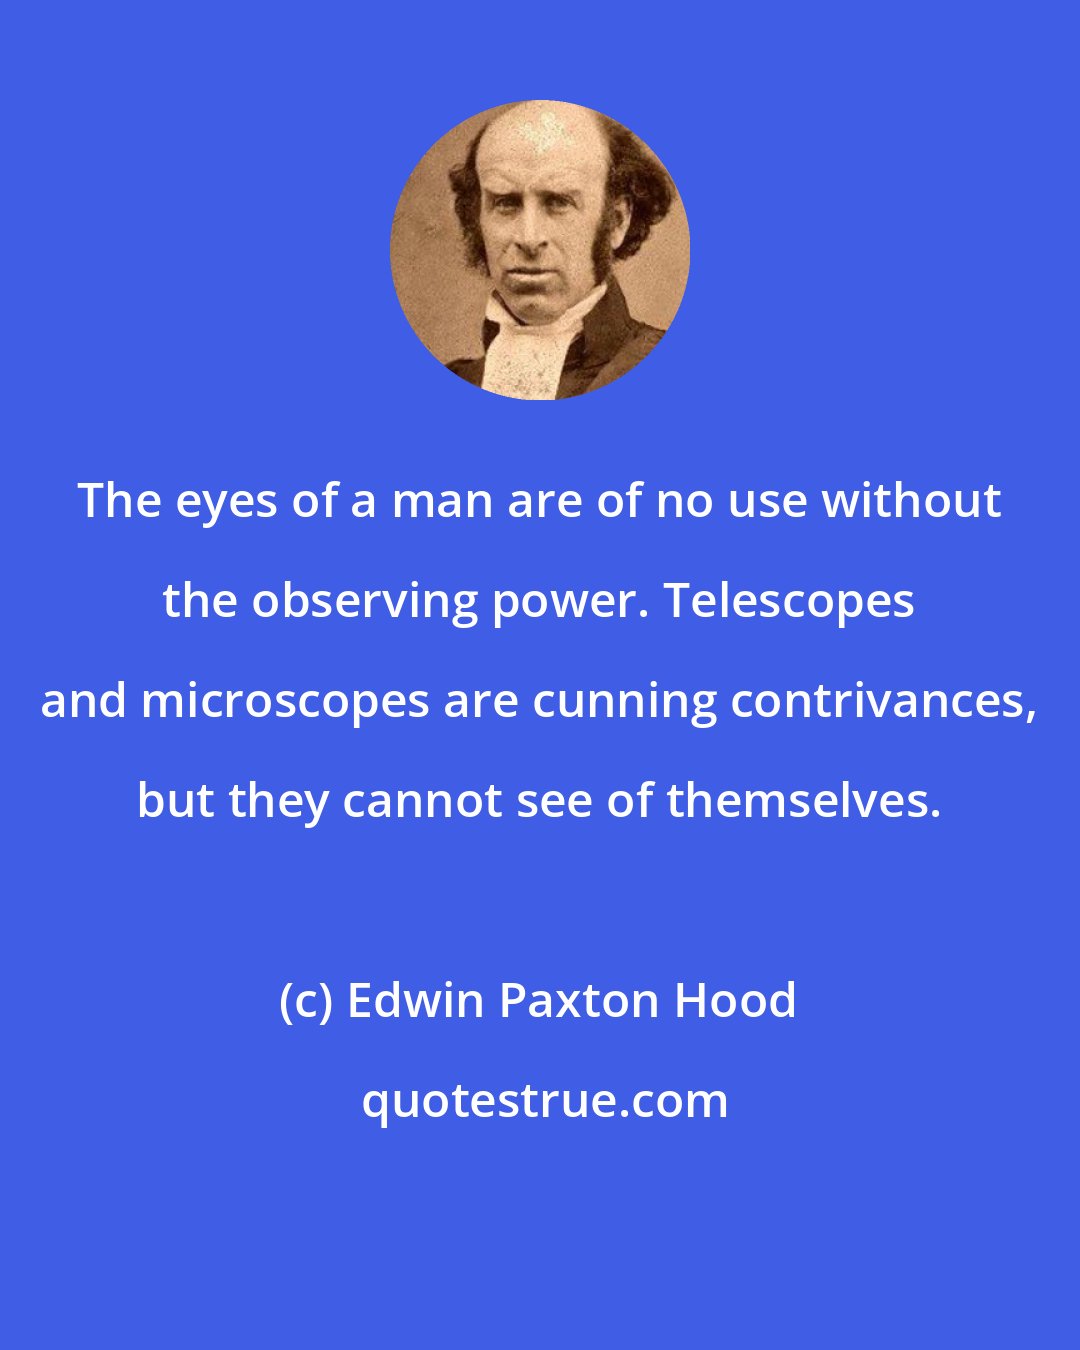 Edwin Paxton Hood: The eyes of a man are of no use without the observing power. Telescopes and microscopes are cunning contrivances, but they cannot see of themselves.